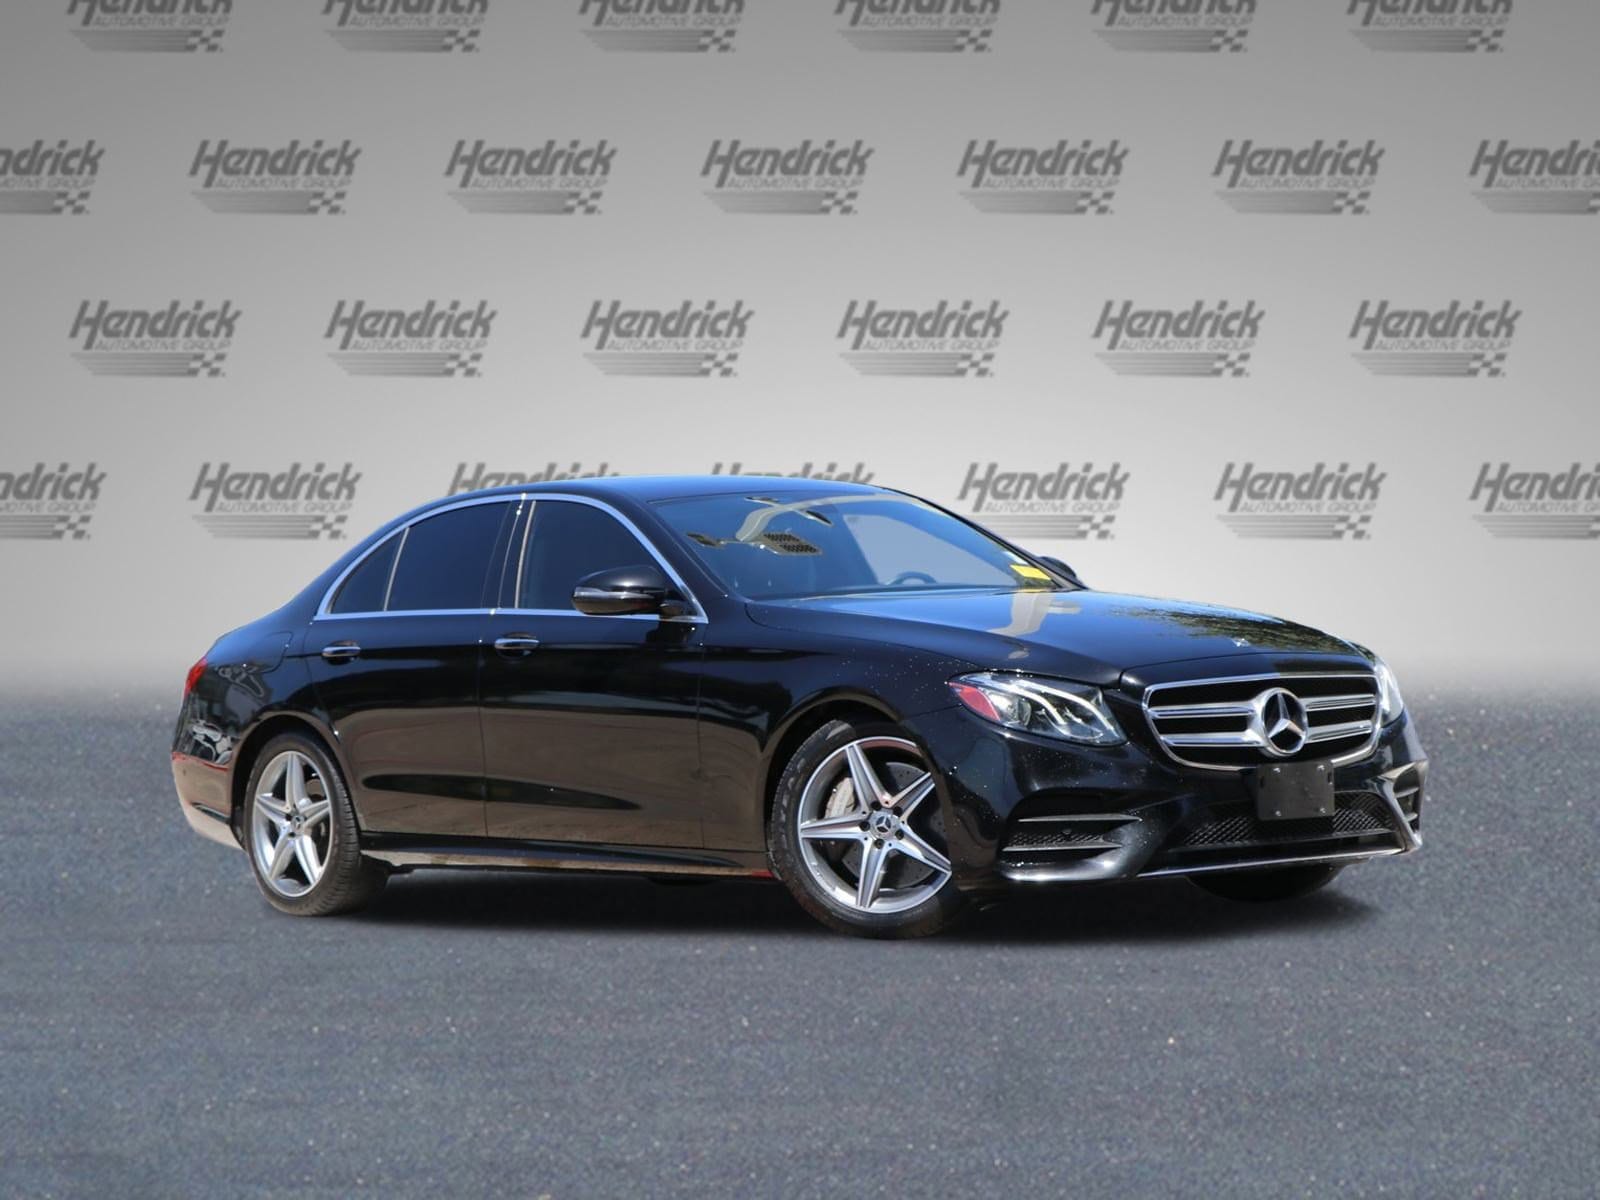 Used 2018 Mercedes-Benz E-Class E300 with VIN WDDZF4JB4JA310800 for sale in Austin, TX